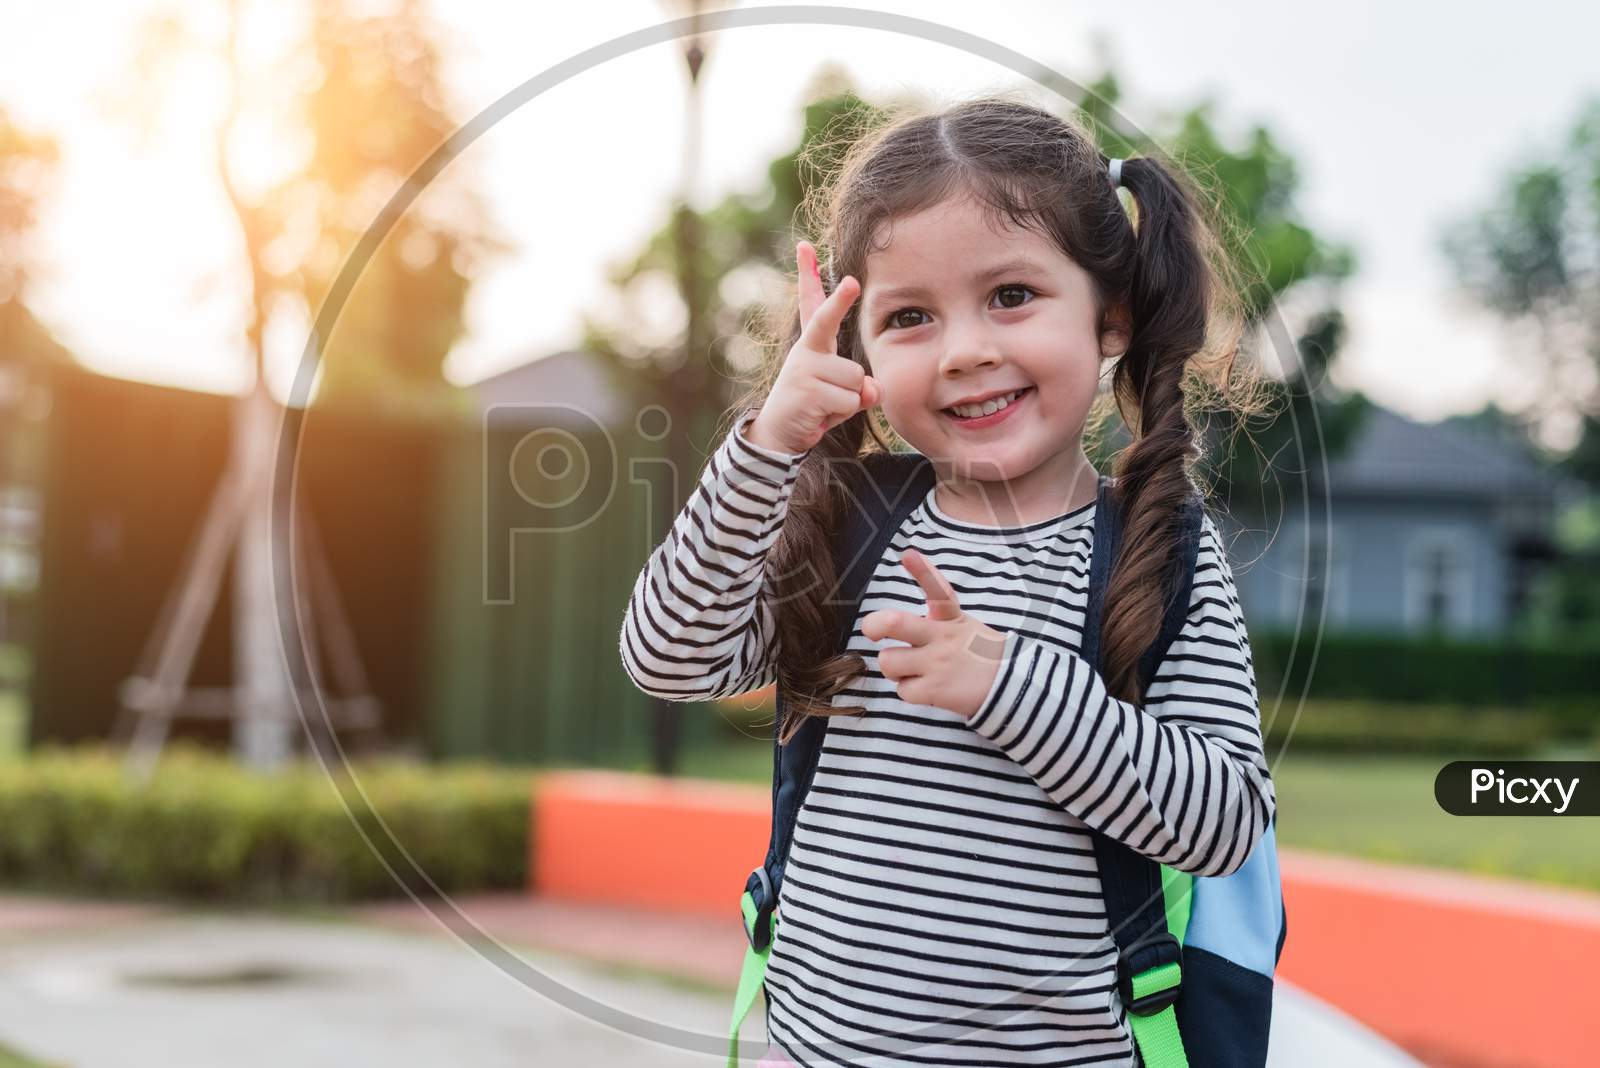 Happy Little Girl Enjoy Going To School. Back To School And Education Concept. Happy Life Family Lifestyle Theme. Cheering Up Gesture